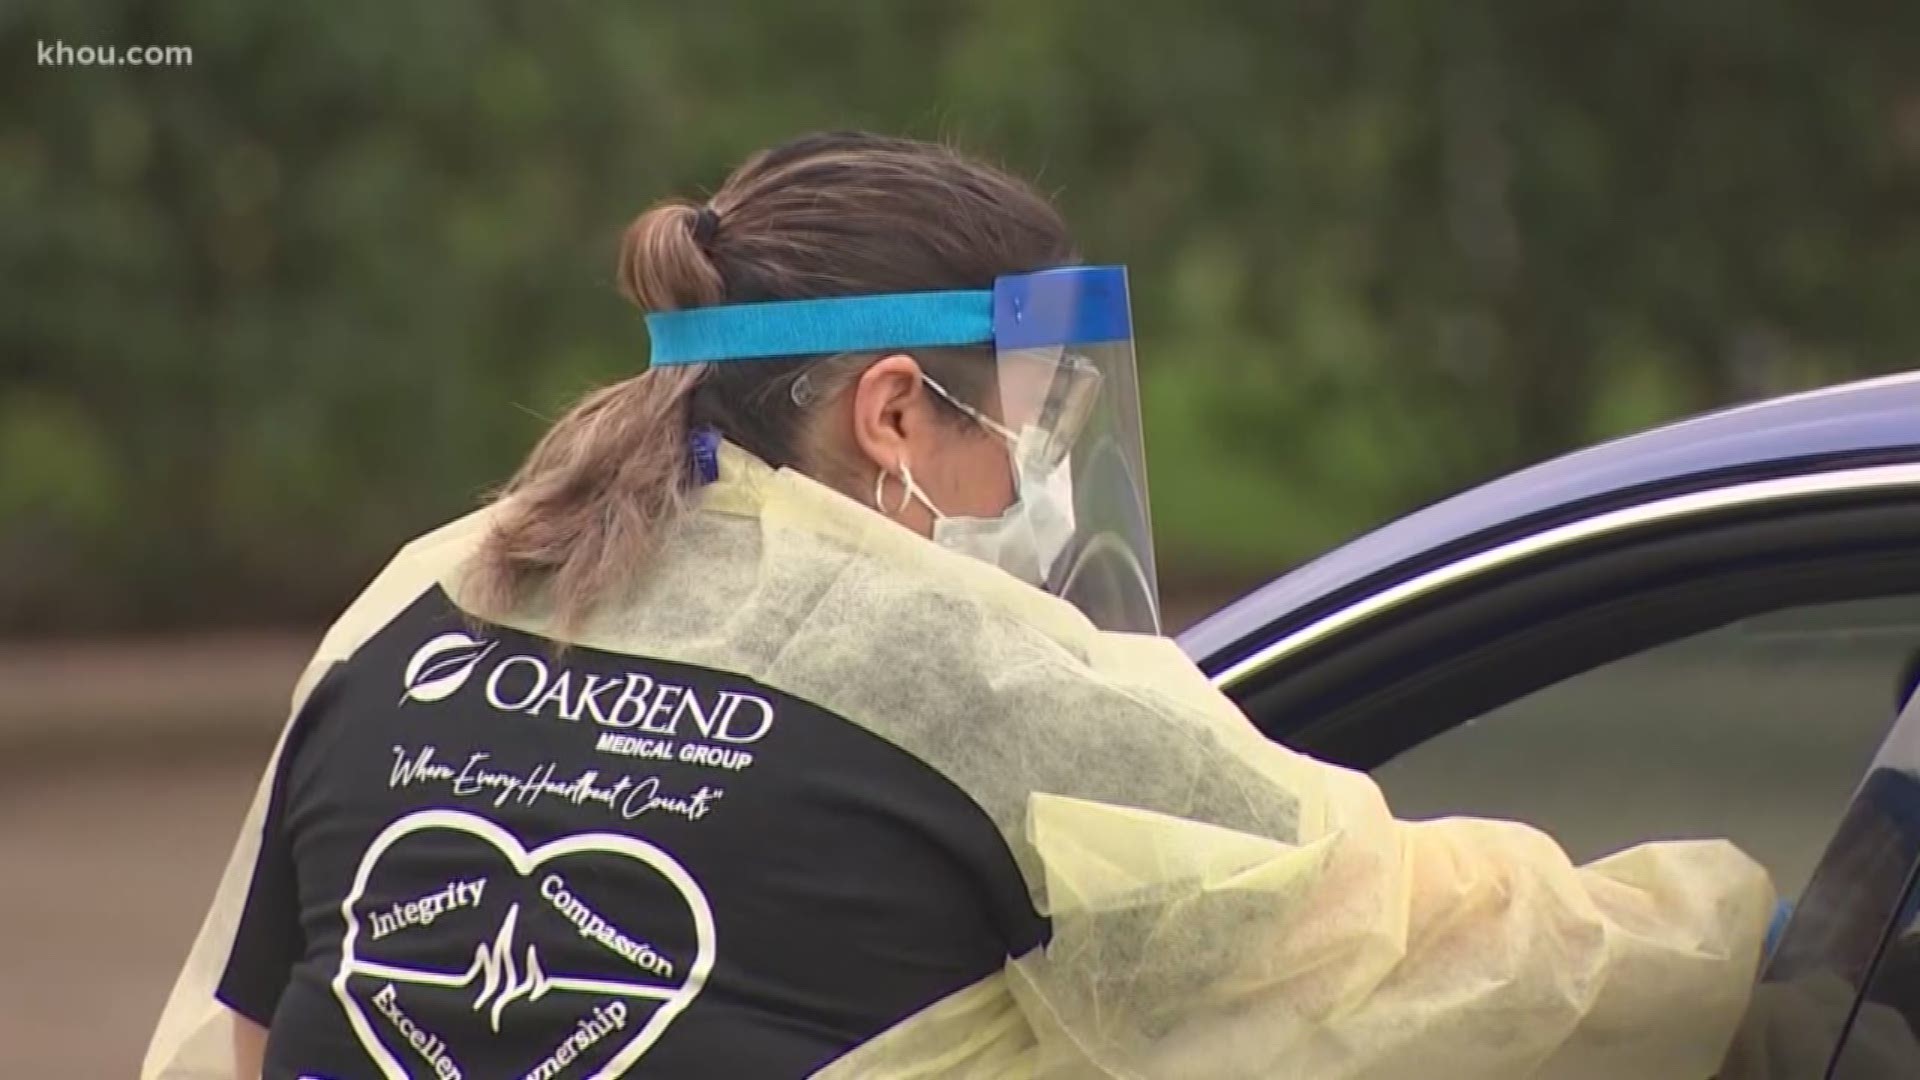 Here's everything you need to know about the first drive-thru coronavirus testing site to open in Fort Bend County.